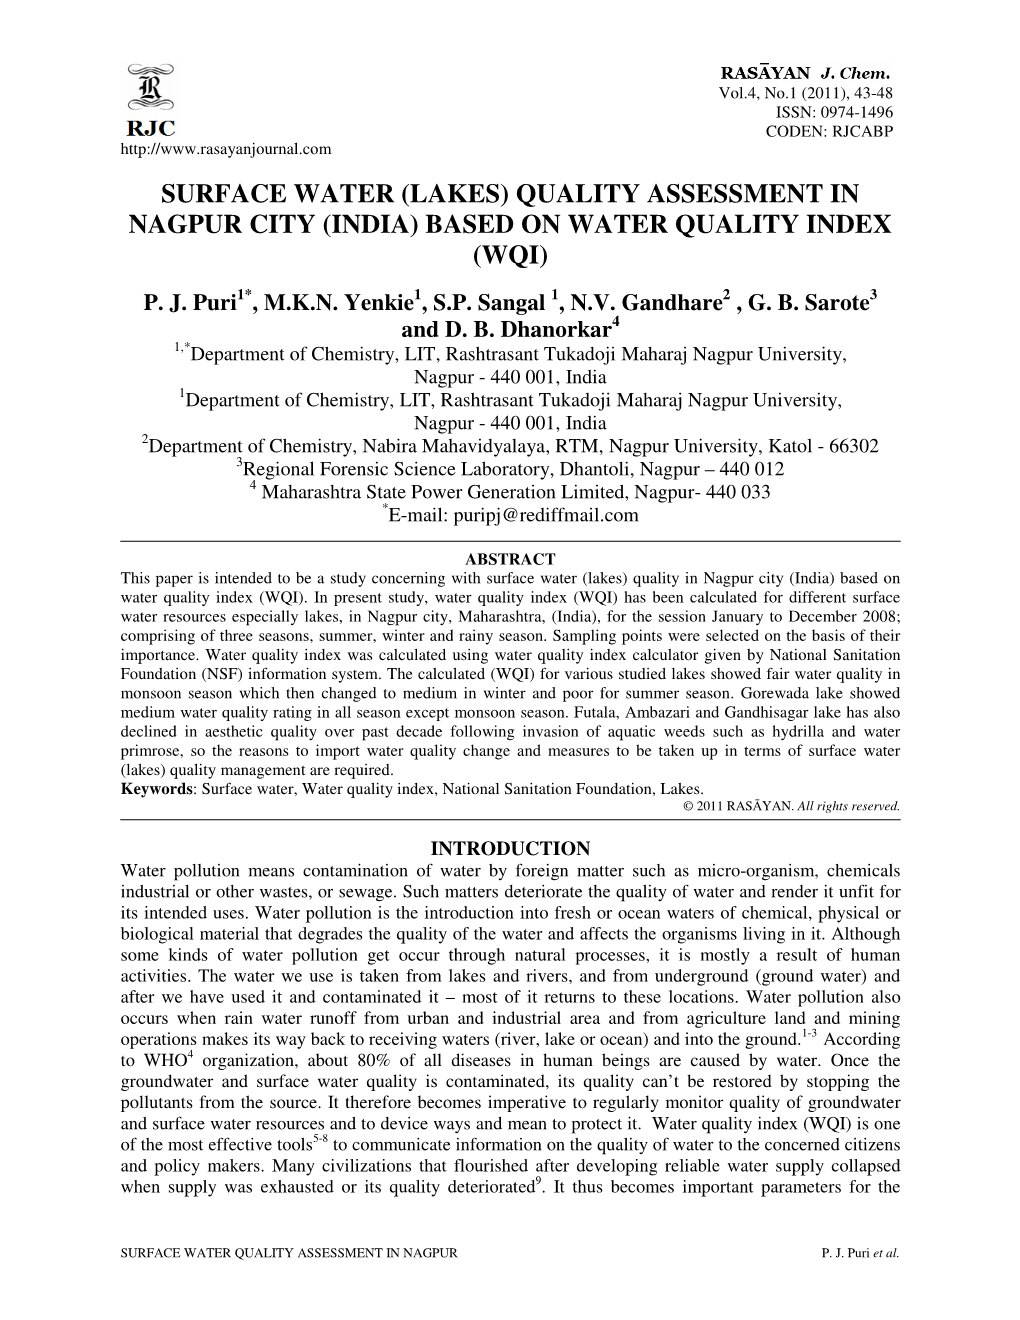 Surface Water (Lakes) Quality Assessment in Nagpur City (India) Based on Water Quality Index (Wqi)